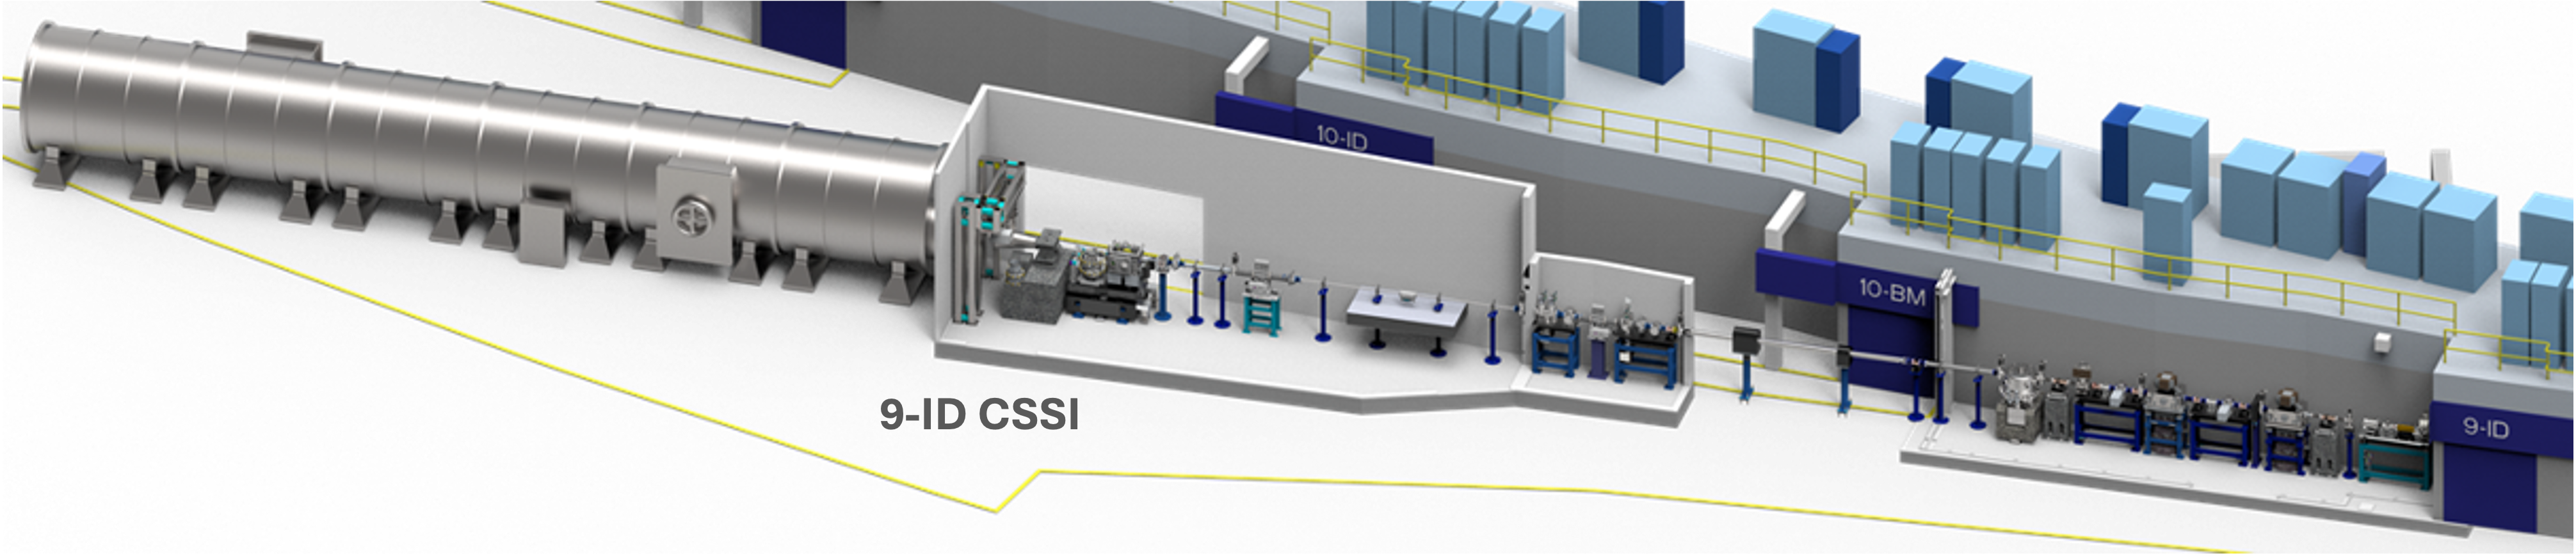 Pre-construction drawing of the CSSI station at 9-ID